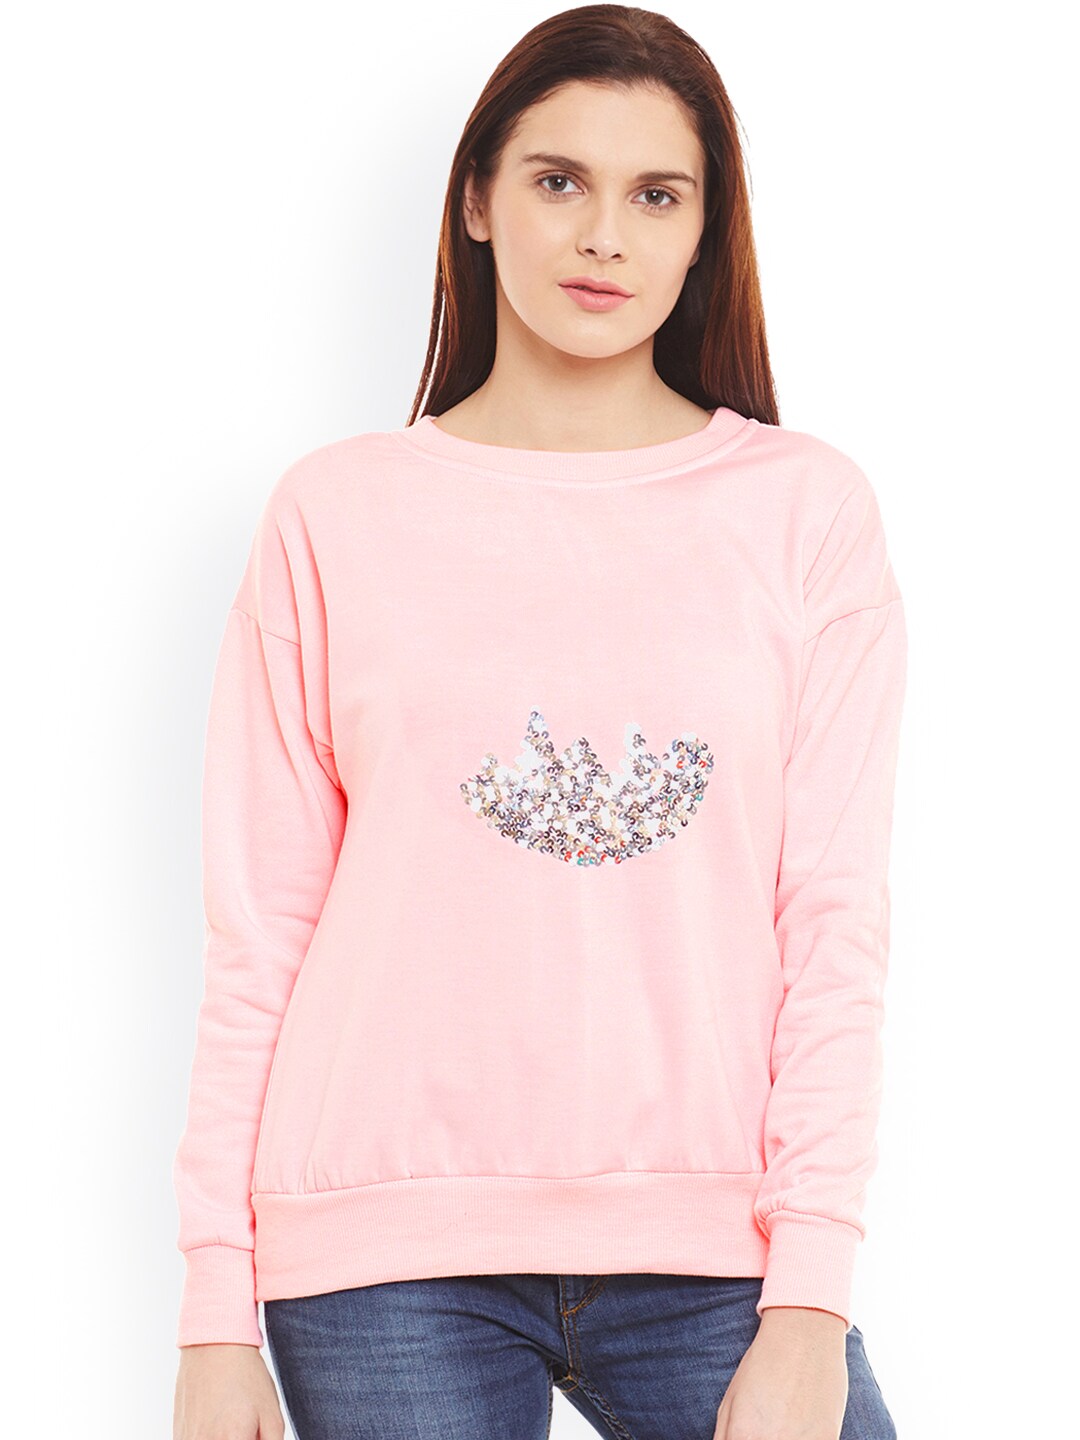 Belle Fille Pink Sweatshirt with Sequinned Detail Price in India